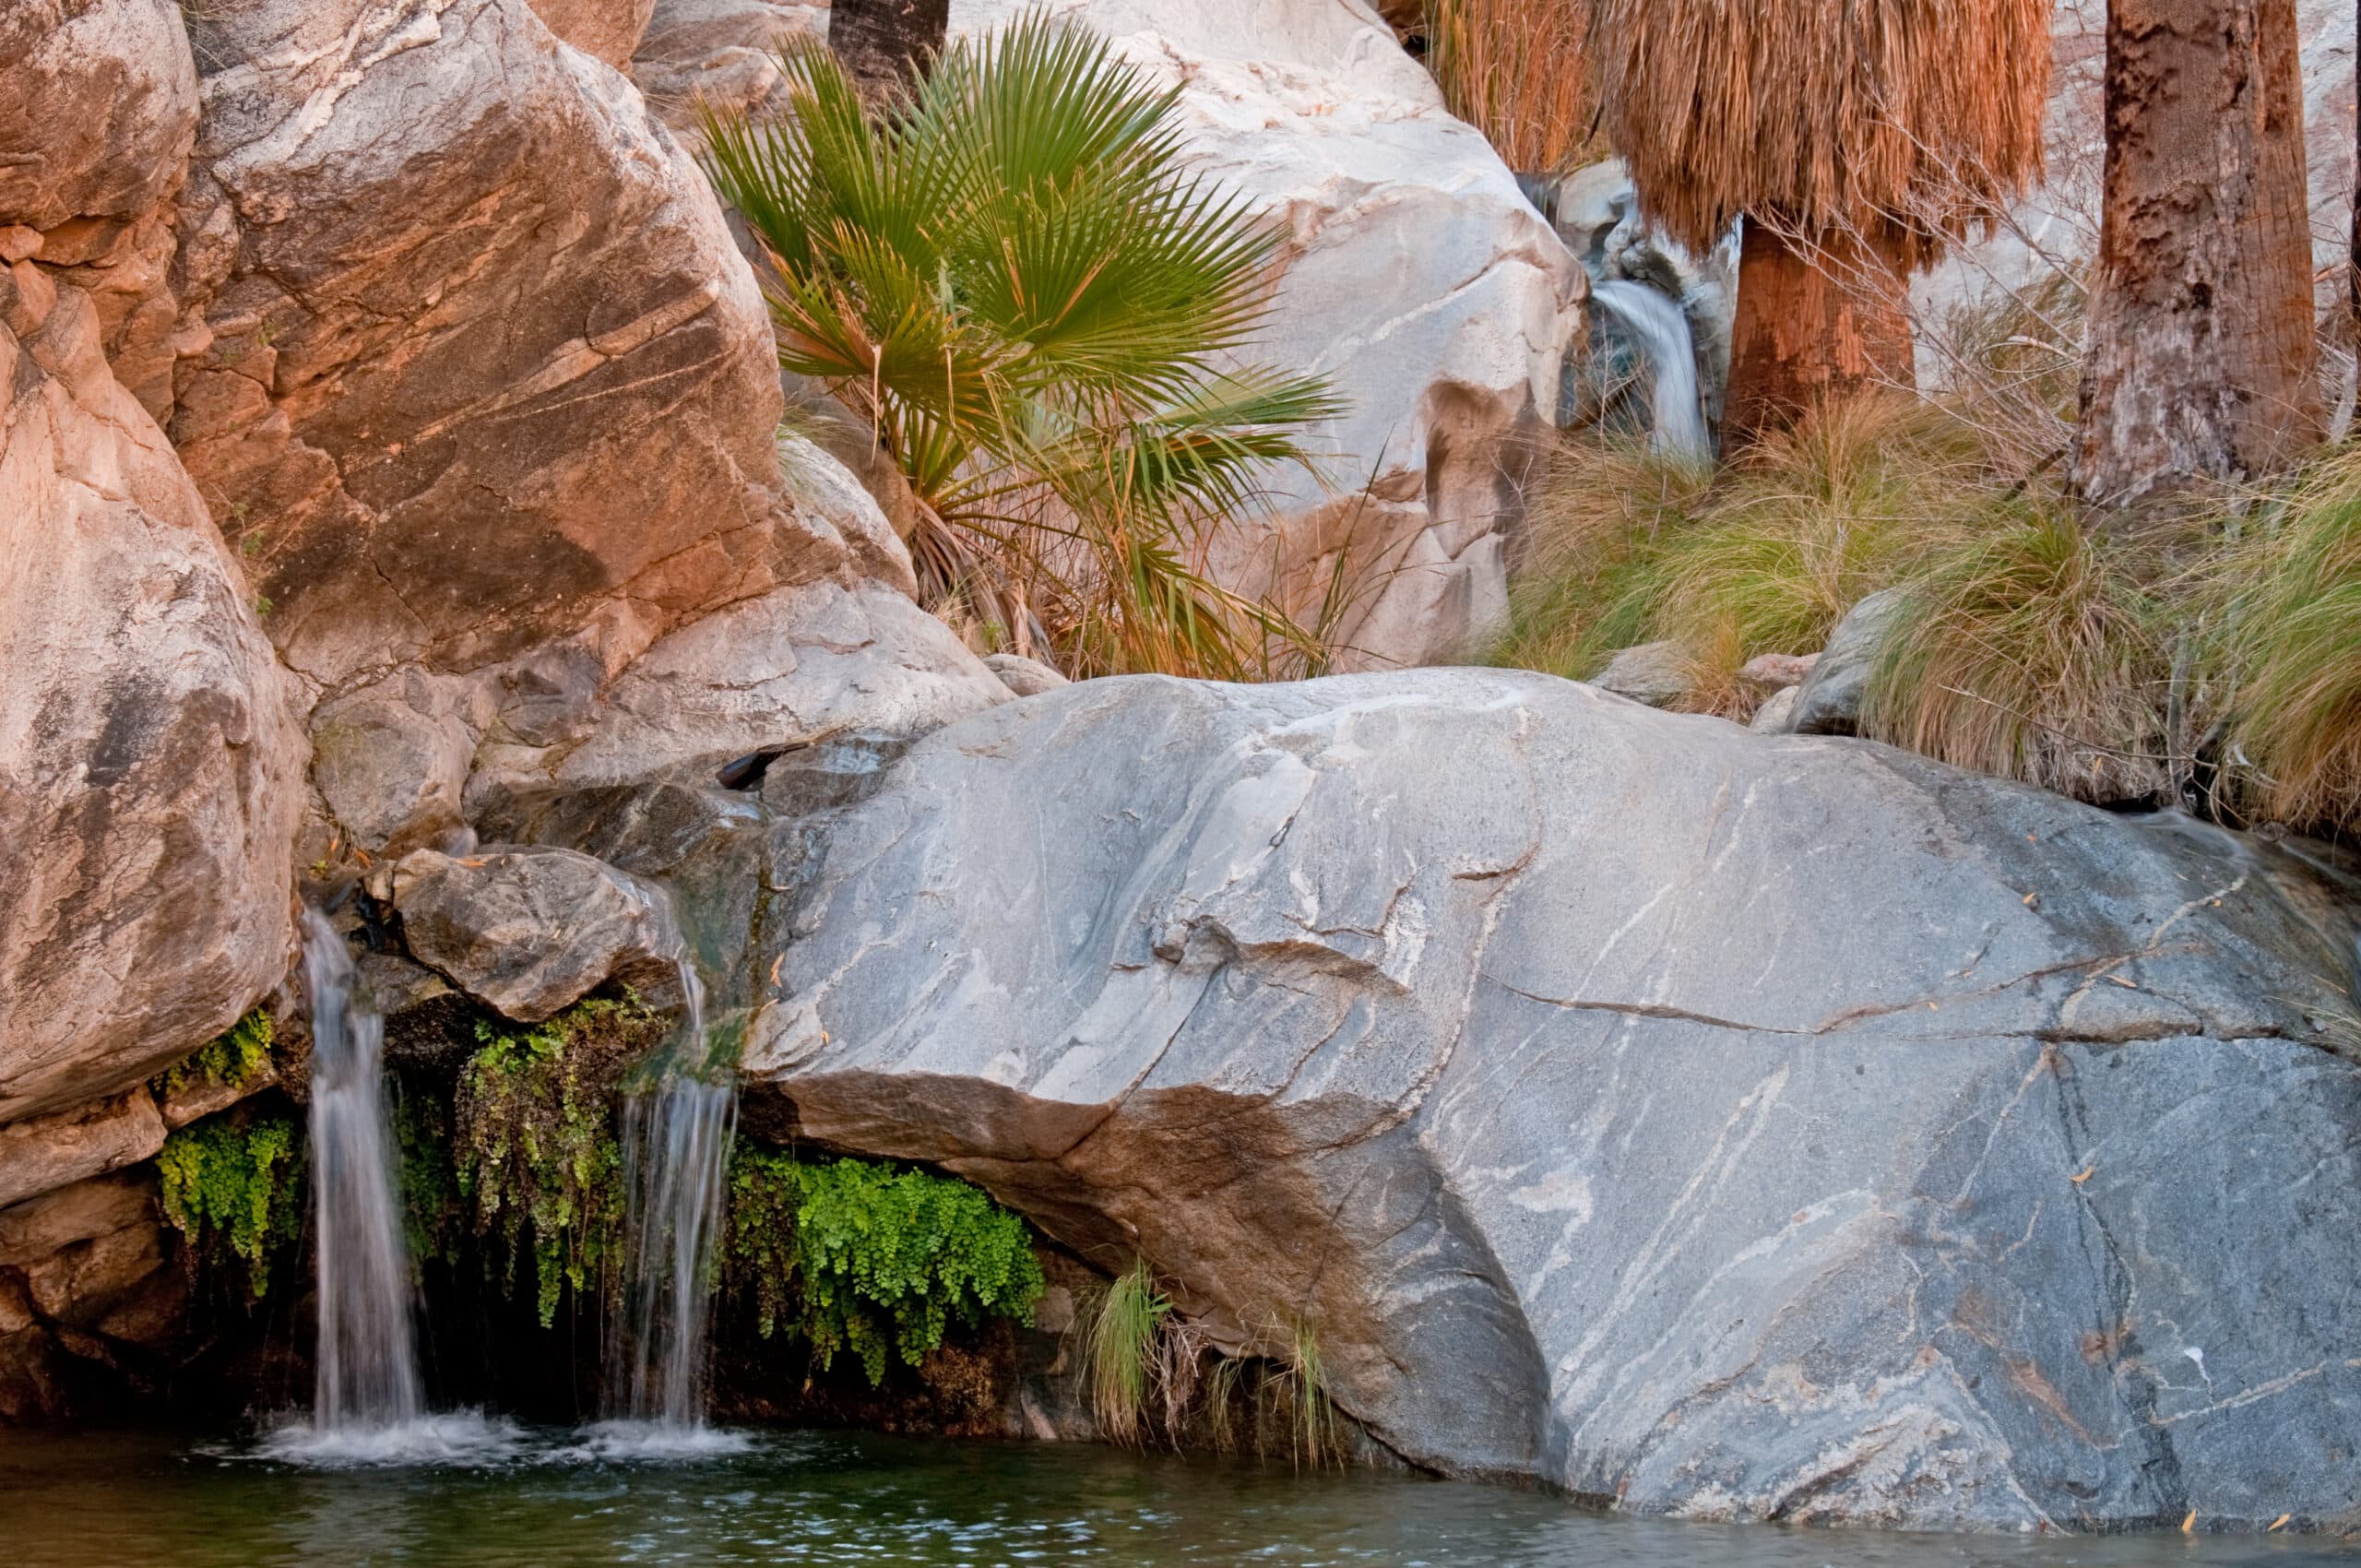 The waterfalls at the end of the Murray Canyon hike in the Indian Canyons preserve near Palm Springs, California.